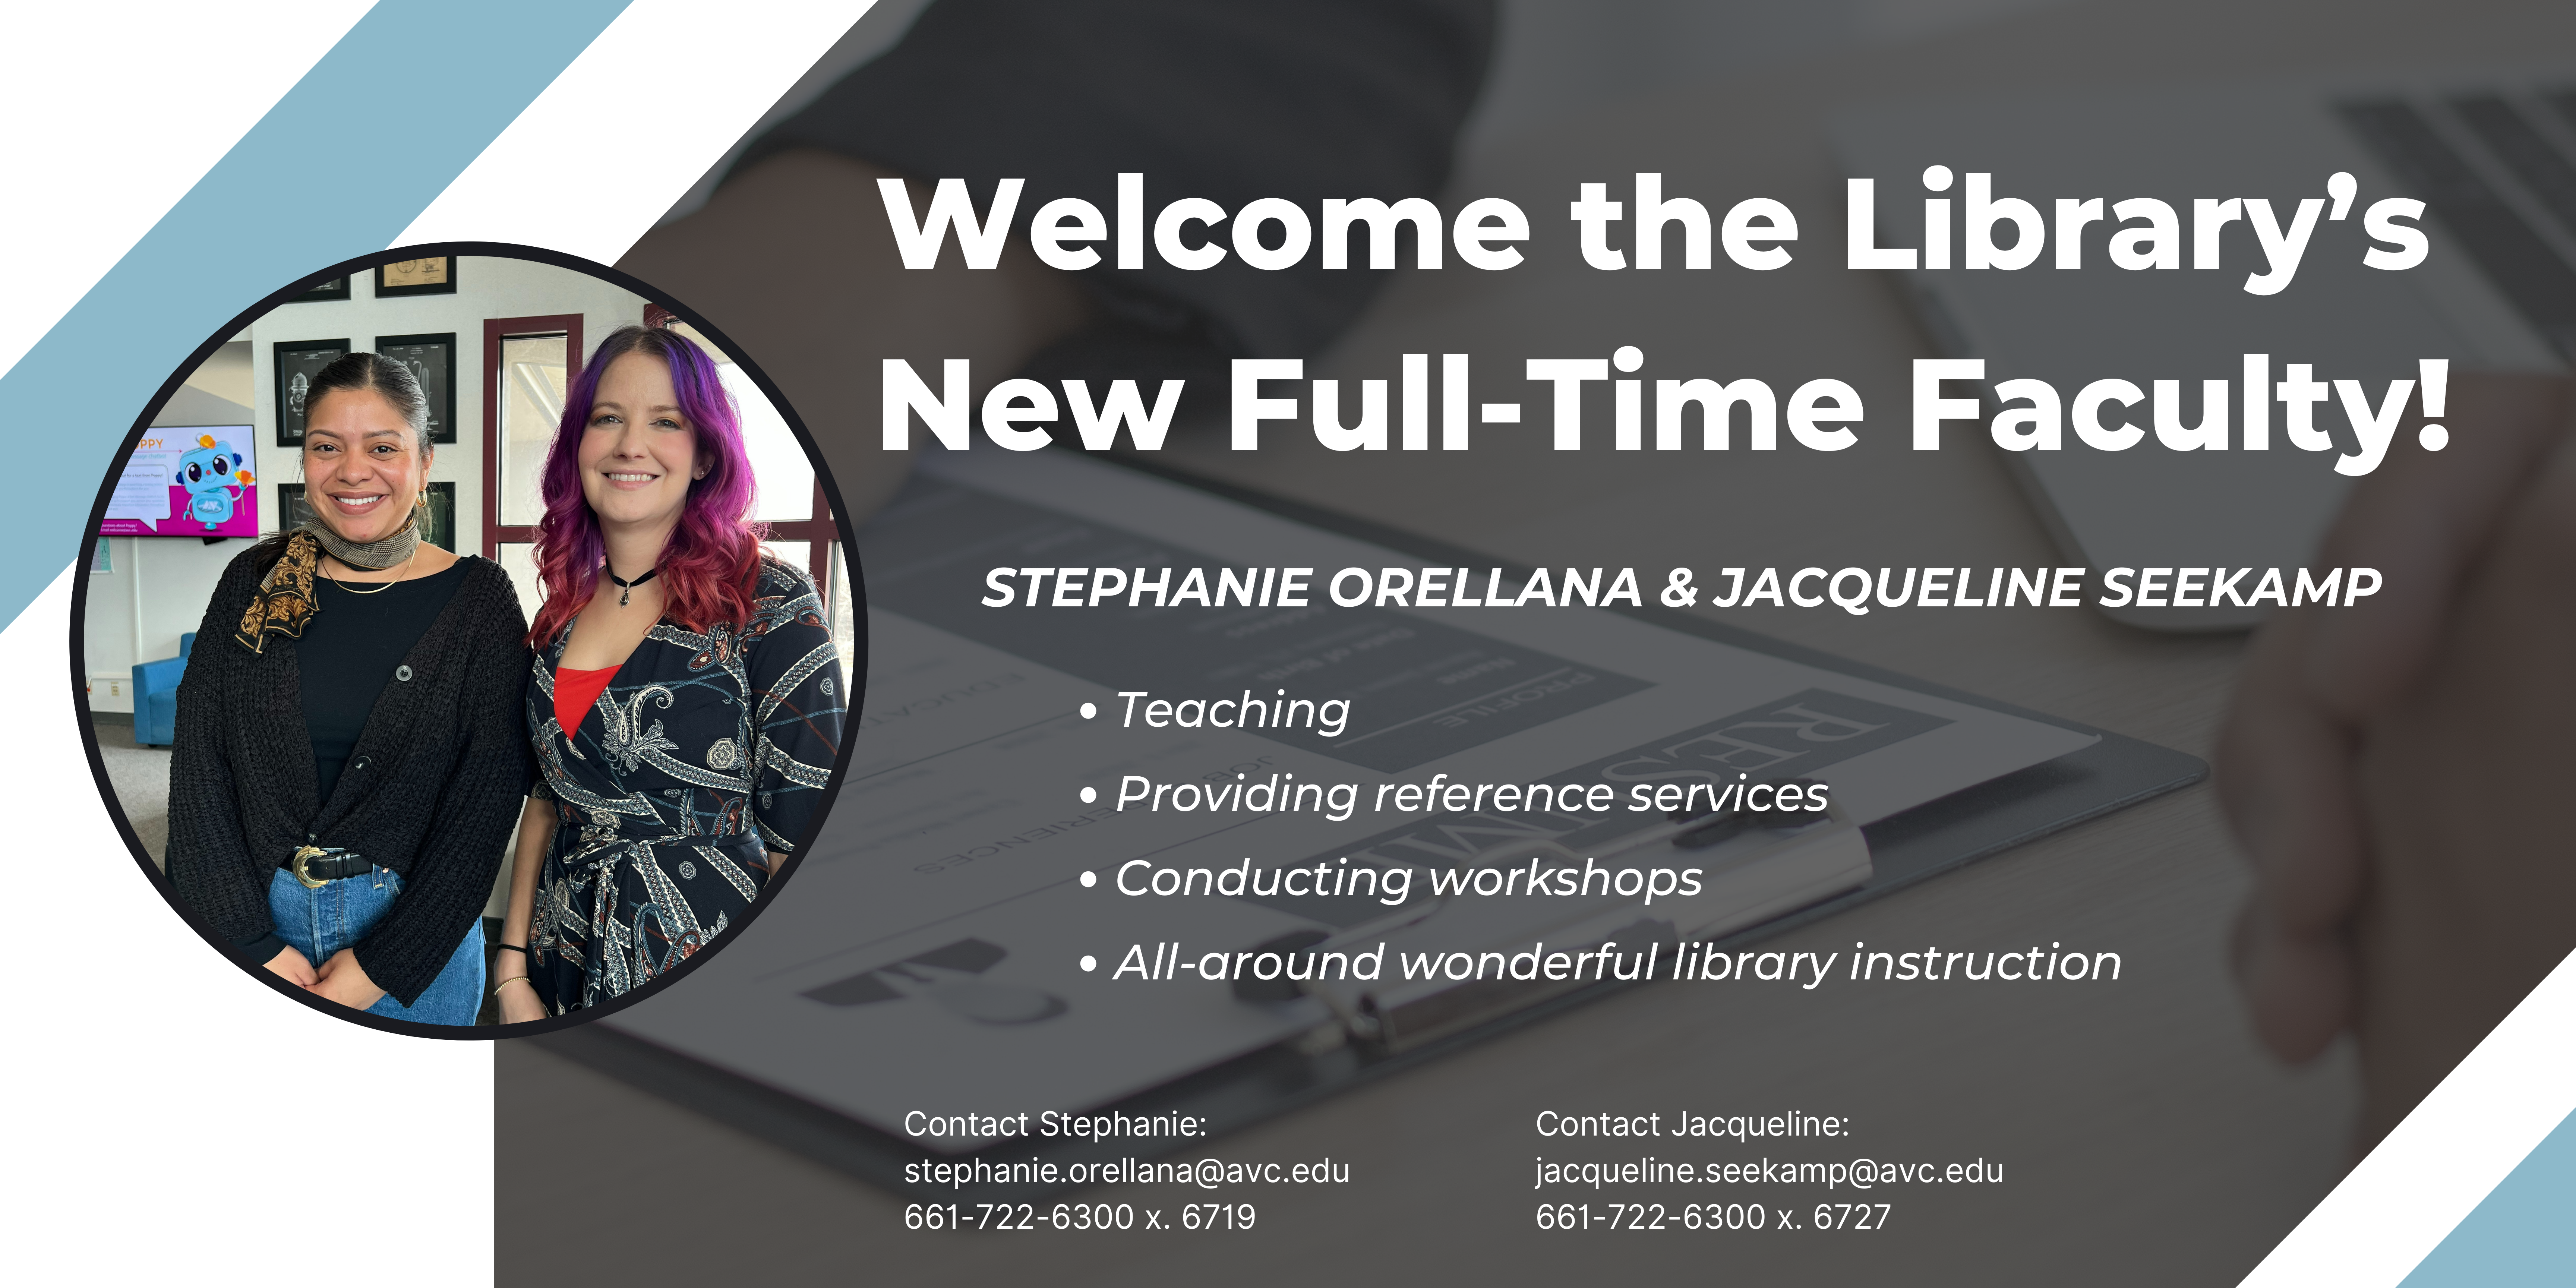 Introducing the library's newest full-time faculty members: Stephanie Orellana & Jacqueline Seekamp. 